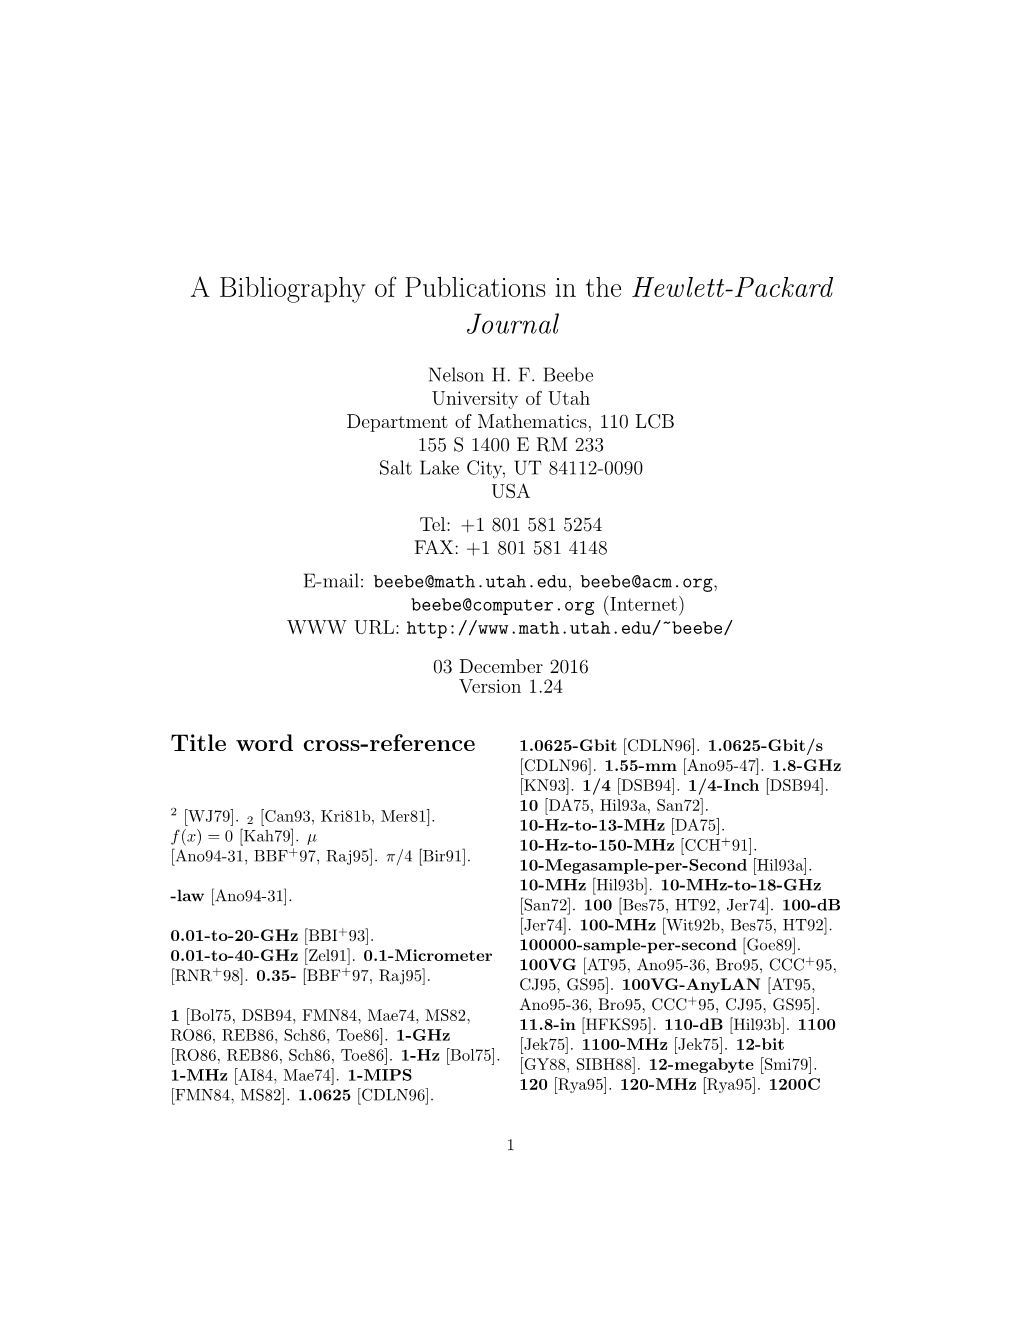 A Bibliography of Publications in the Hewlett-Packard Journal